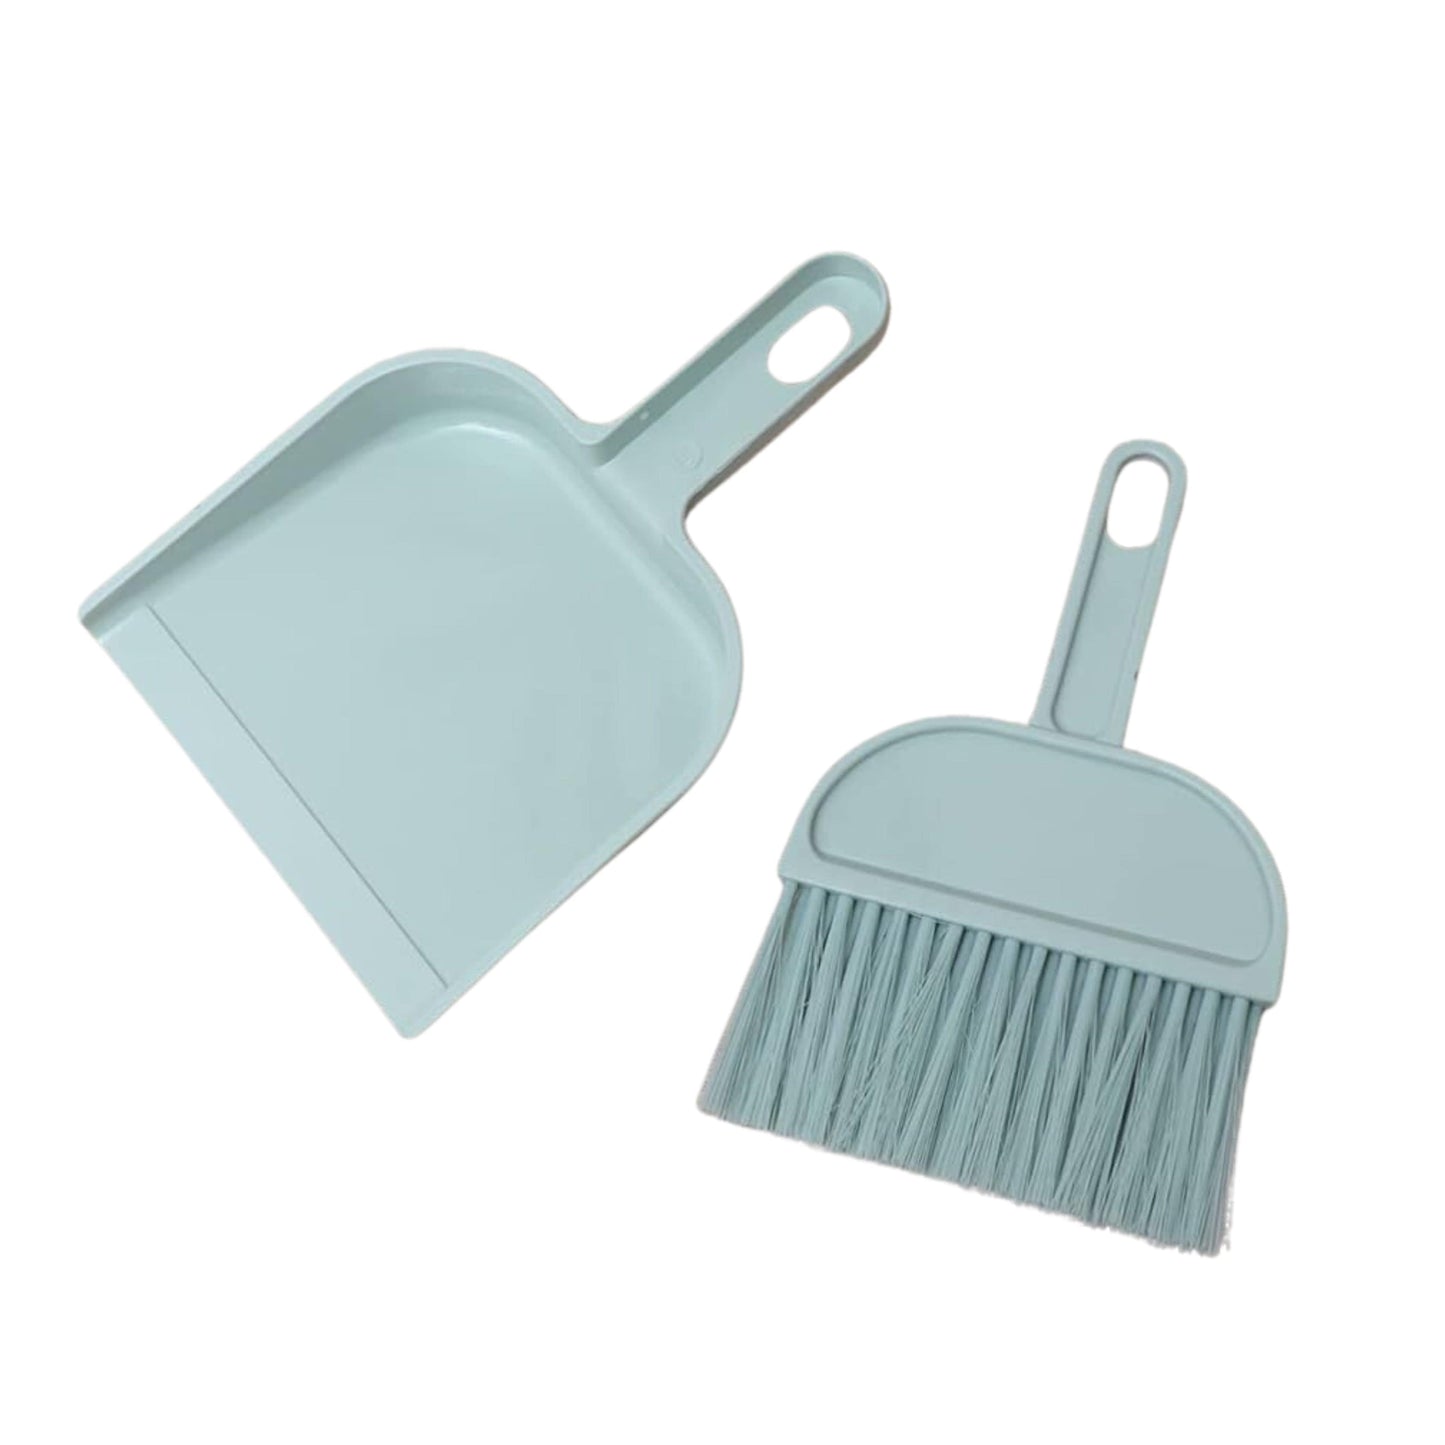 BRANDS & BEYOND Cleaning & Household Green Mini Broom Toy Broom Kids Broom Cleaning Tools Cleaning